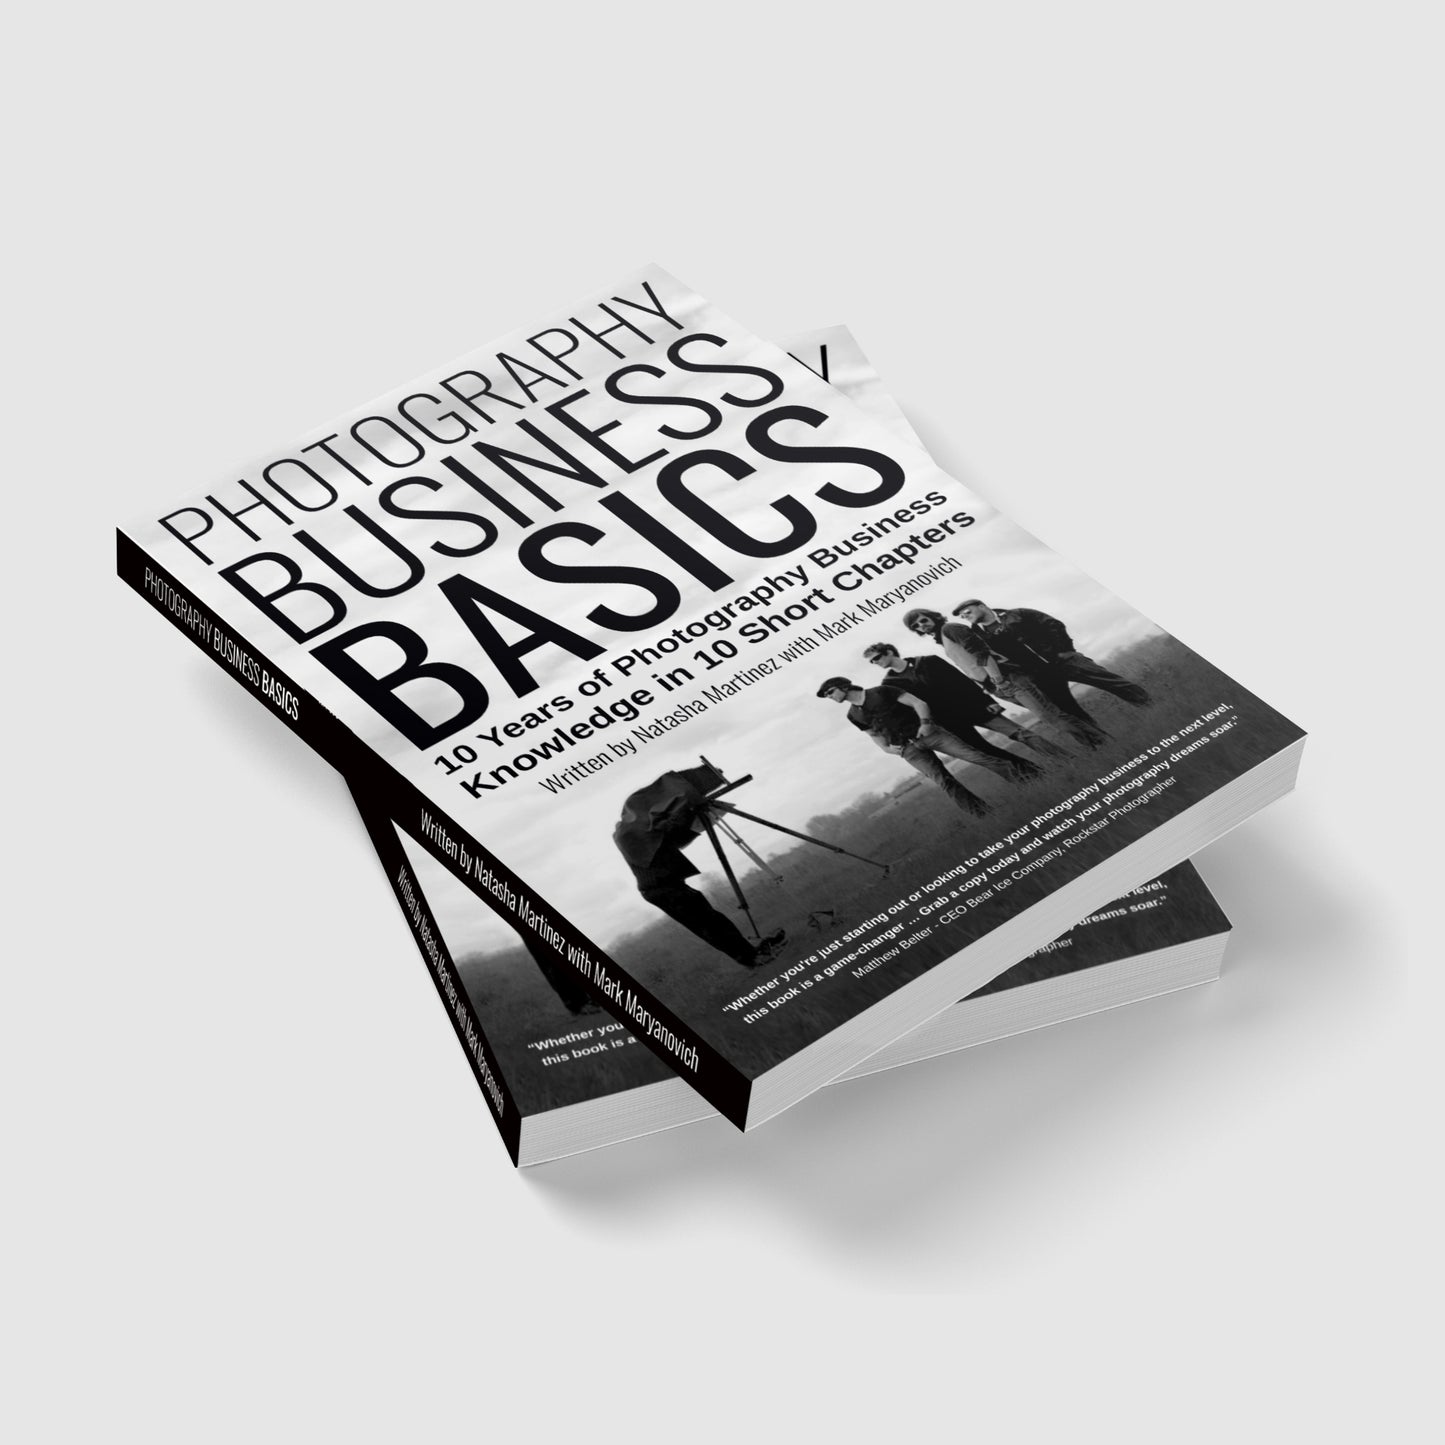 The Book: Photography Business Basics: 10 Years of Photography Business Knowledge in 10 Short Chapters